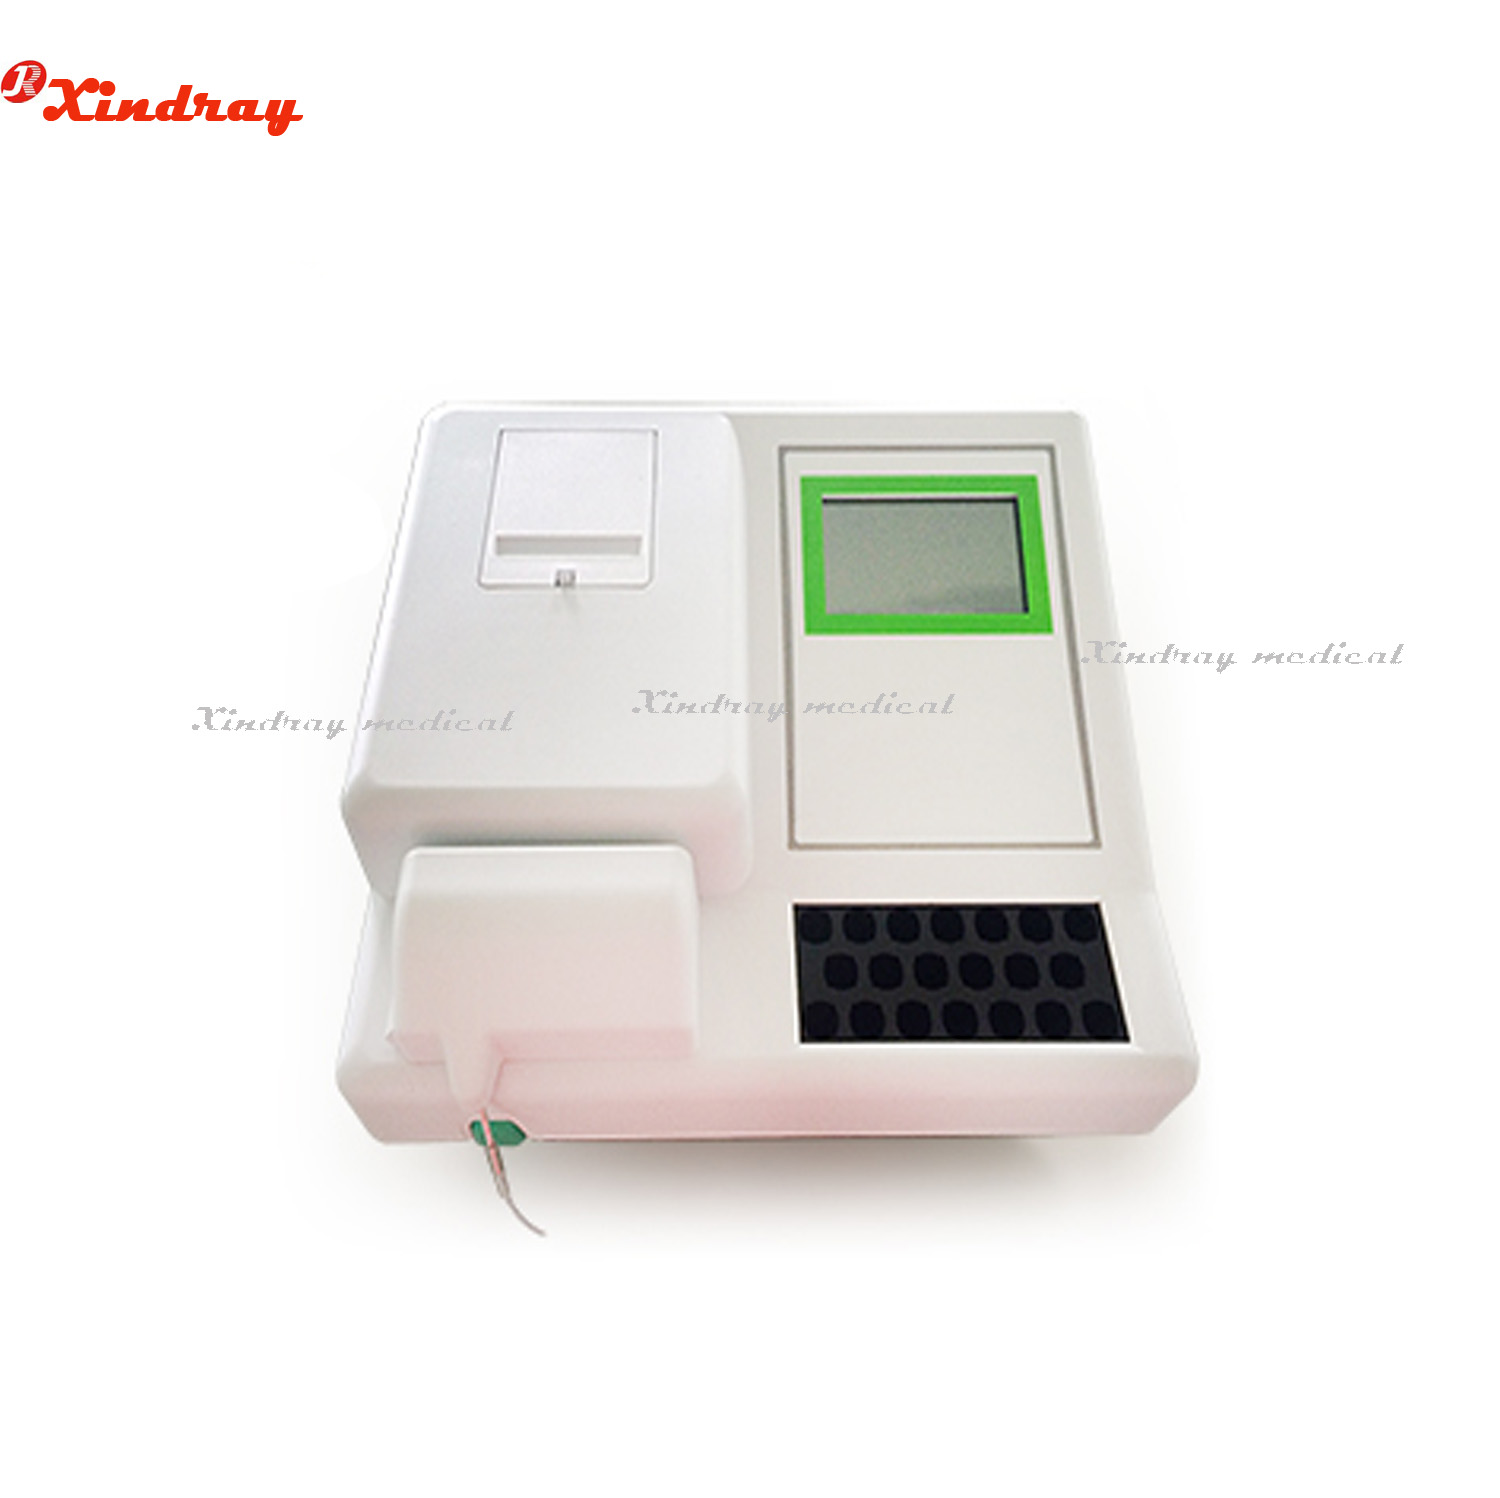 5 inch touch screen,humanized operation interface,built-in thermal printer